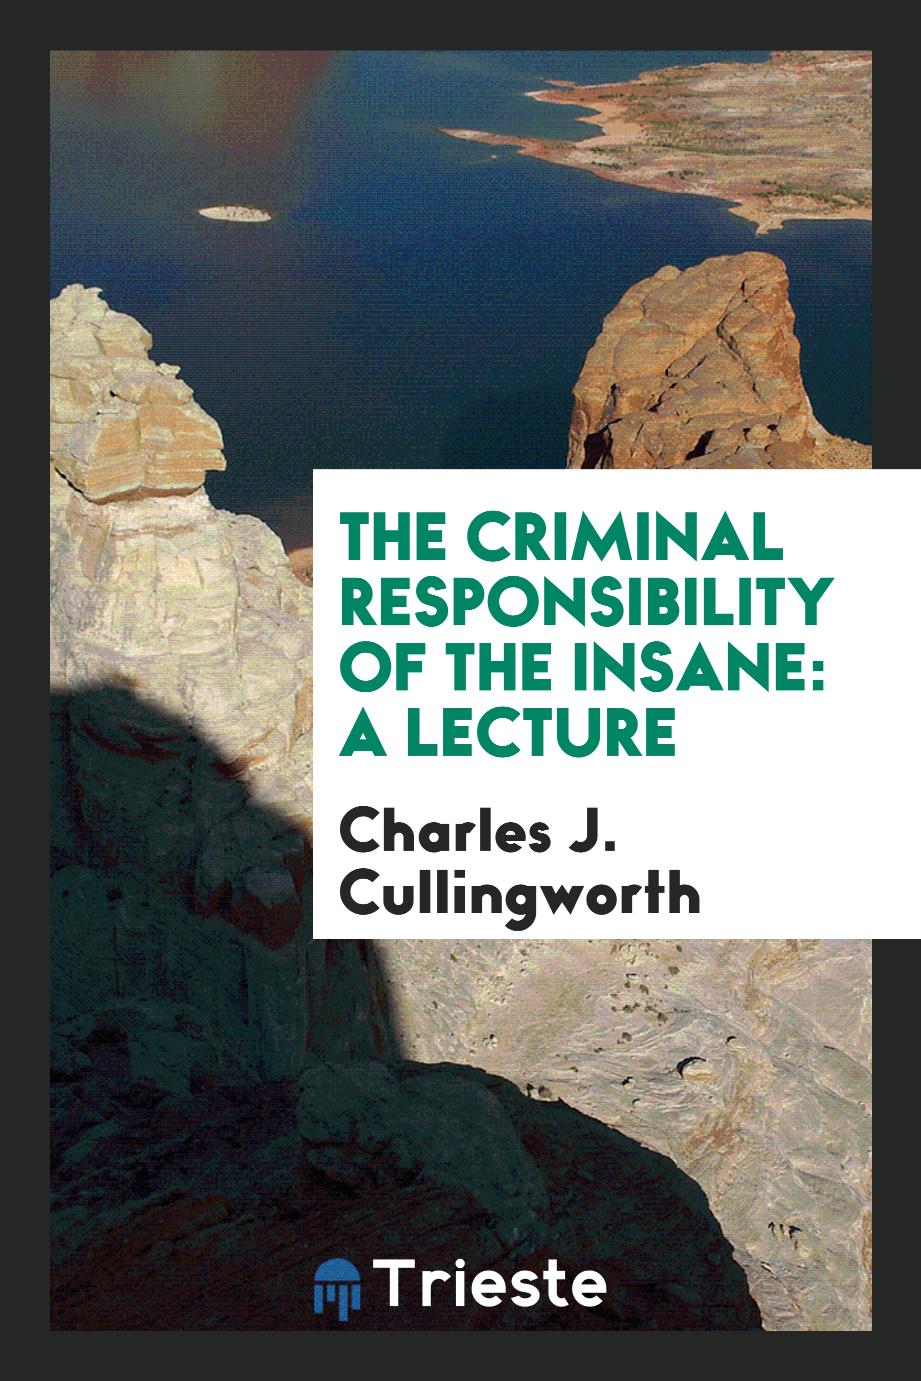 The Criminal Responsibility of the Insane: A Lecture